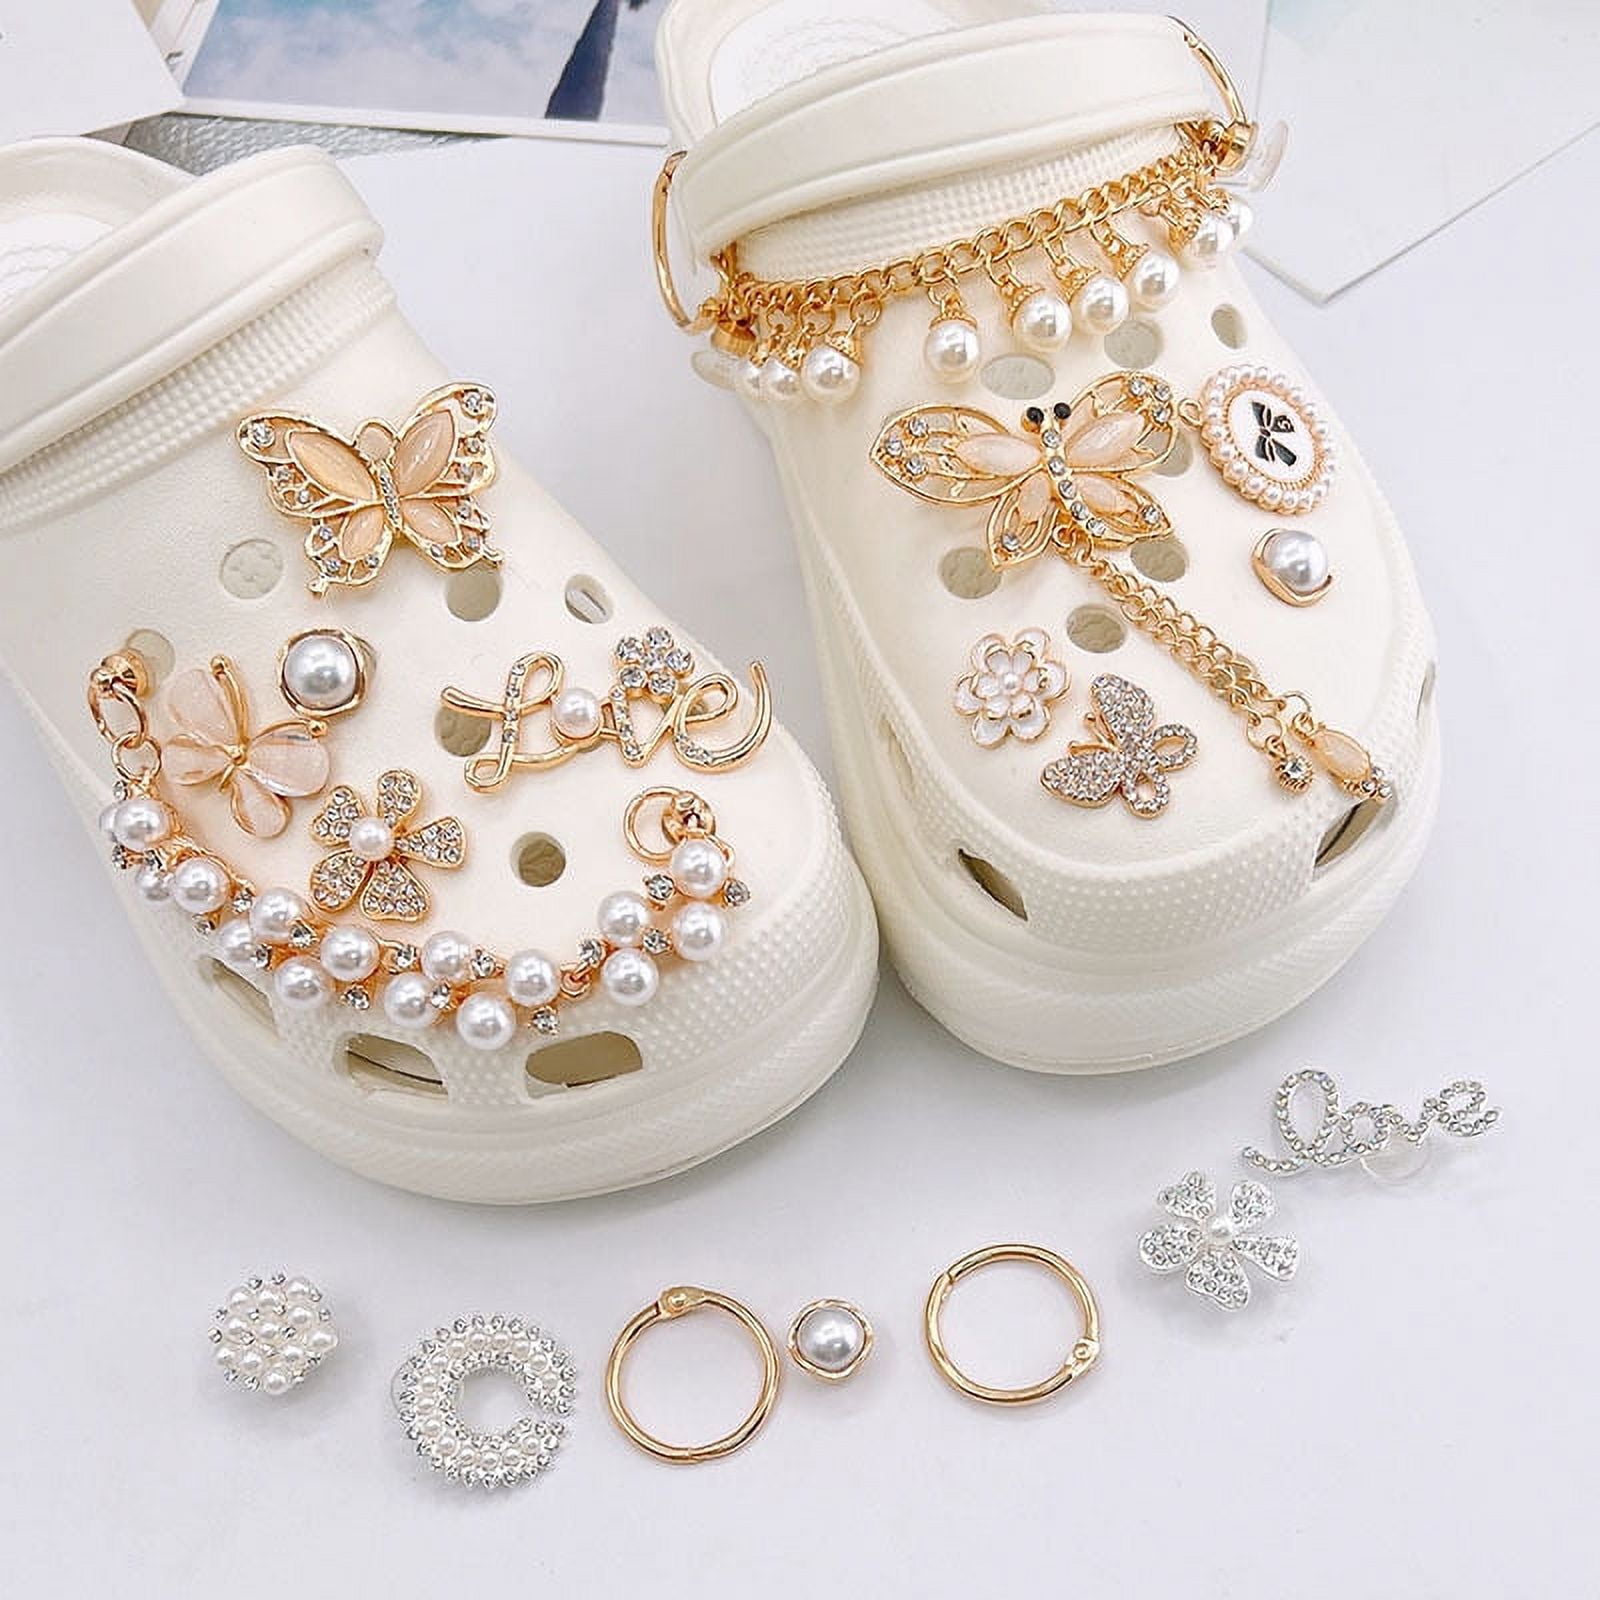 Idefair Shoe Charms 18PCS, Cute Flower Shoe Decoration Bling Pearl Croc  Charms for Clog Sandal, DIY Birthday Gift for Girls Women